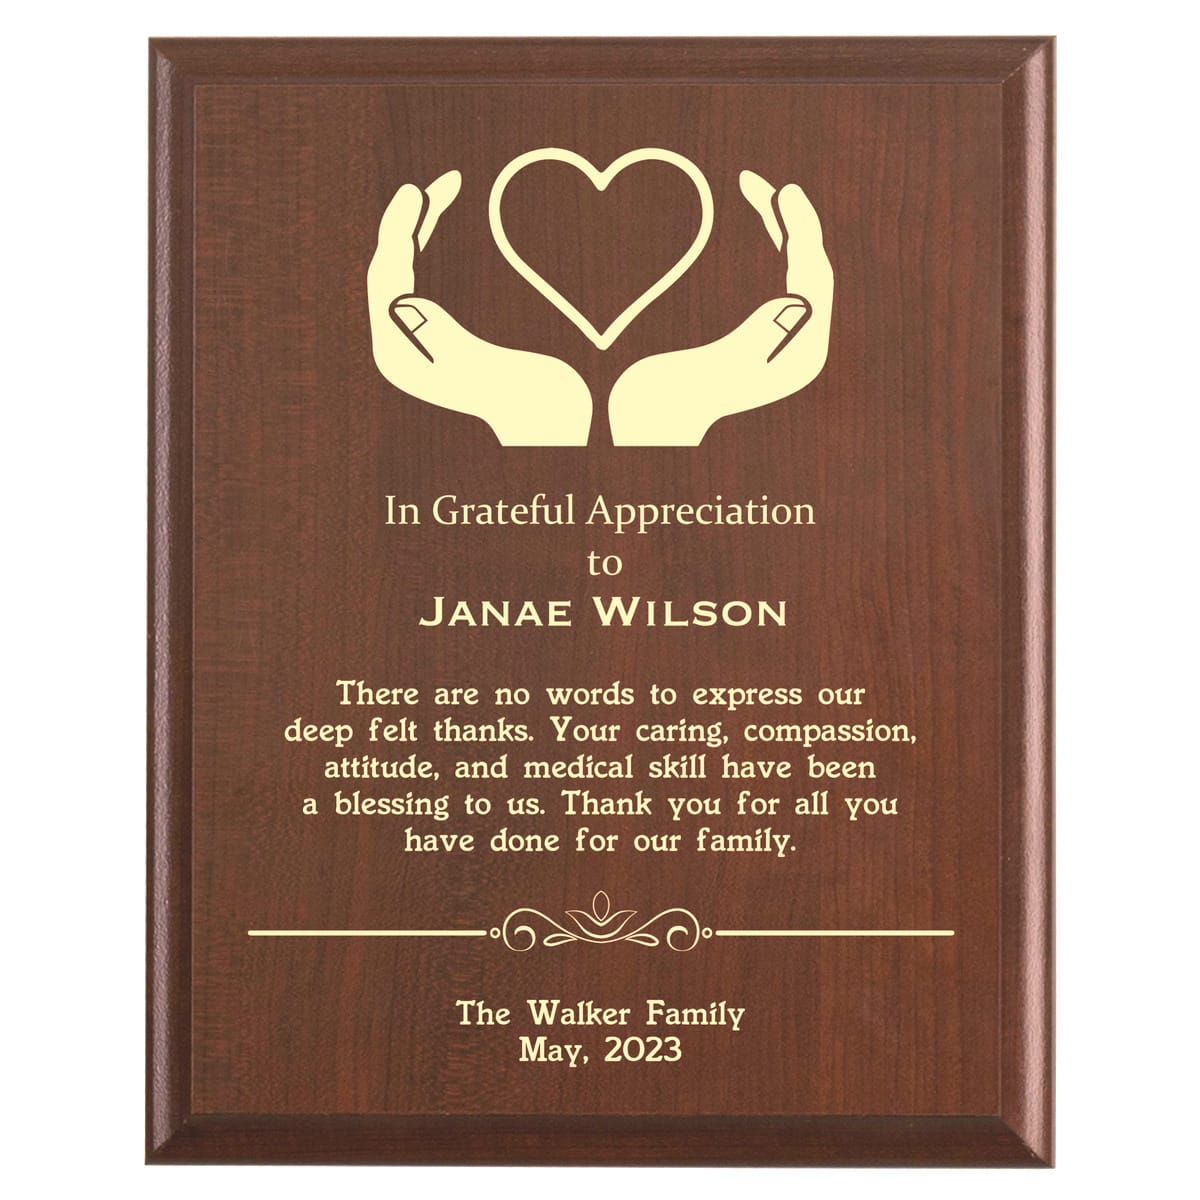 Plaque photo: Nursing Home Thank You Gift design with free personalization. Wood style finish with customized text.